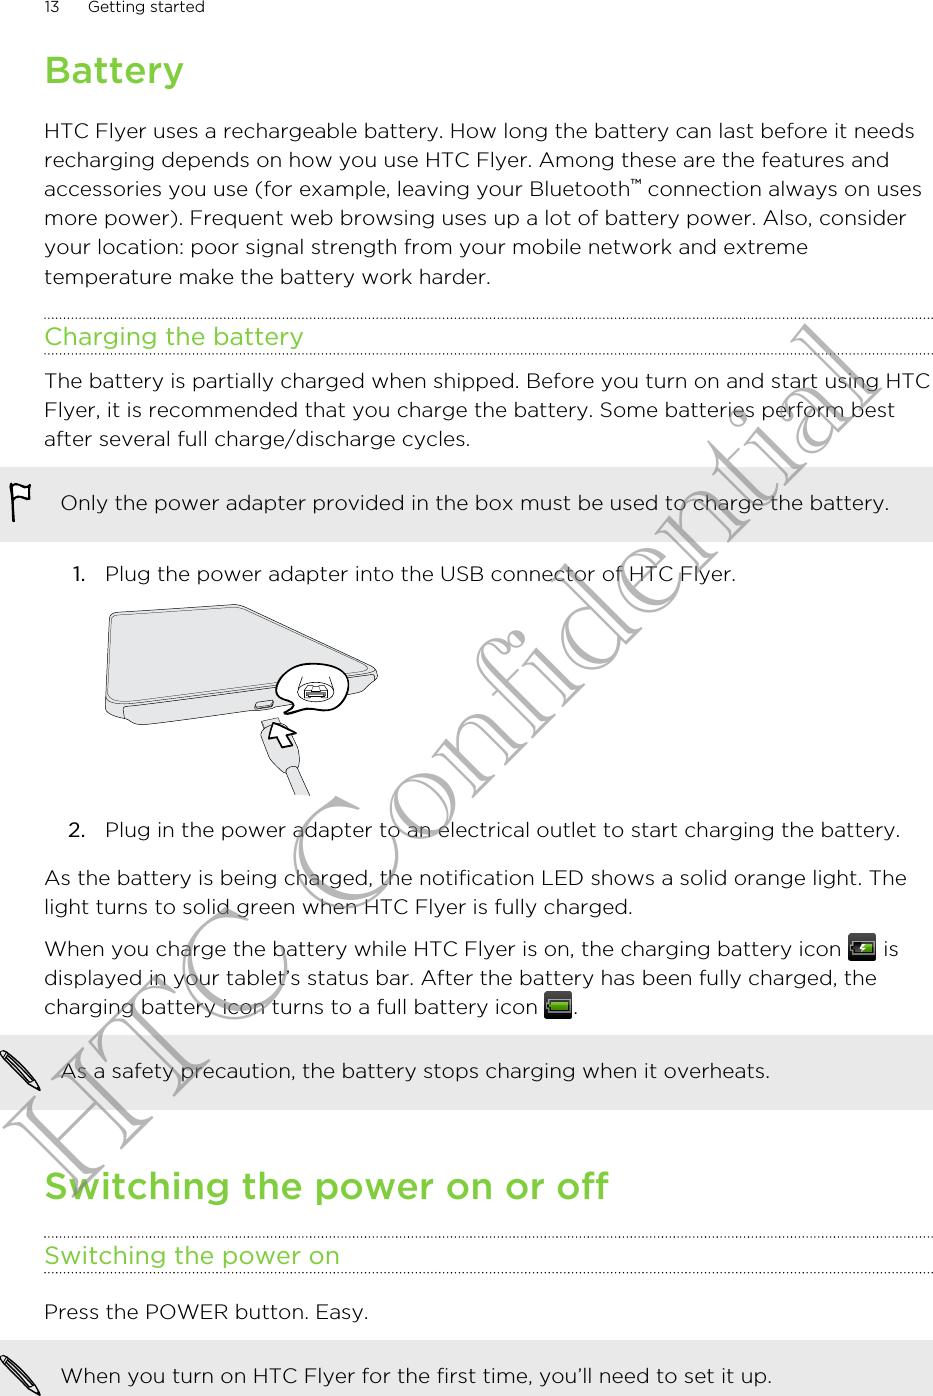 BatteryHTC Flyer uses a rechargeable battery. How long the battery can last before it needsrecharging depends on how you use HTC Flyer. Among these are the features andaccessories you use (for example, leaving your Bluetooth™ connection always on usesmore power). Frequent web browsing uses up a lot of battery power. Also, consideryour location: poor signal strength from your mobile network and extremetemperature make the battery work harder.Charging the batteryThe battery is partially charged when shipped. Before you turn on and start using HTCFlyer, it is recommended that you charge the battery. Some batteries perform bestafter several full charge/discharge cycles.Only the power adapter provided in the box must be used to charge the battery.1. Plug the power adapter into the USB connector of HTC Flyer. 2. Plug in the power adapter to an electrical outlet to start charging the battery.As the battery is being charged, the notification LED shows a solid orange light. Thelight turns to solid green when HTC Flyer is fully charged.When you charge the battery while HTC Flyer is on, the charging battery icon   isdisplayed in your tablet’s status bar. After the battery has been fully charged, thecharging battery icon turns to a full battery icon  .As a safety precaution, the battery stops charging when it overheats.Switching the power on or offSwitching the power onPress the POWER button. Easy. When you turn on HTC Flyer for the first time, you’ll need to set it up.13 Getting startedHTC Confidential